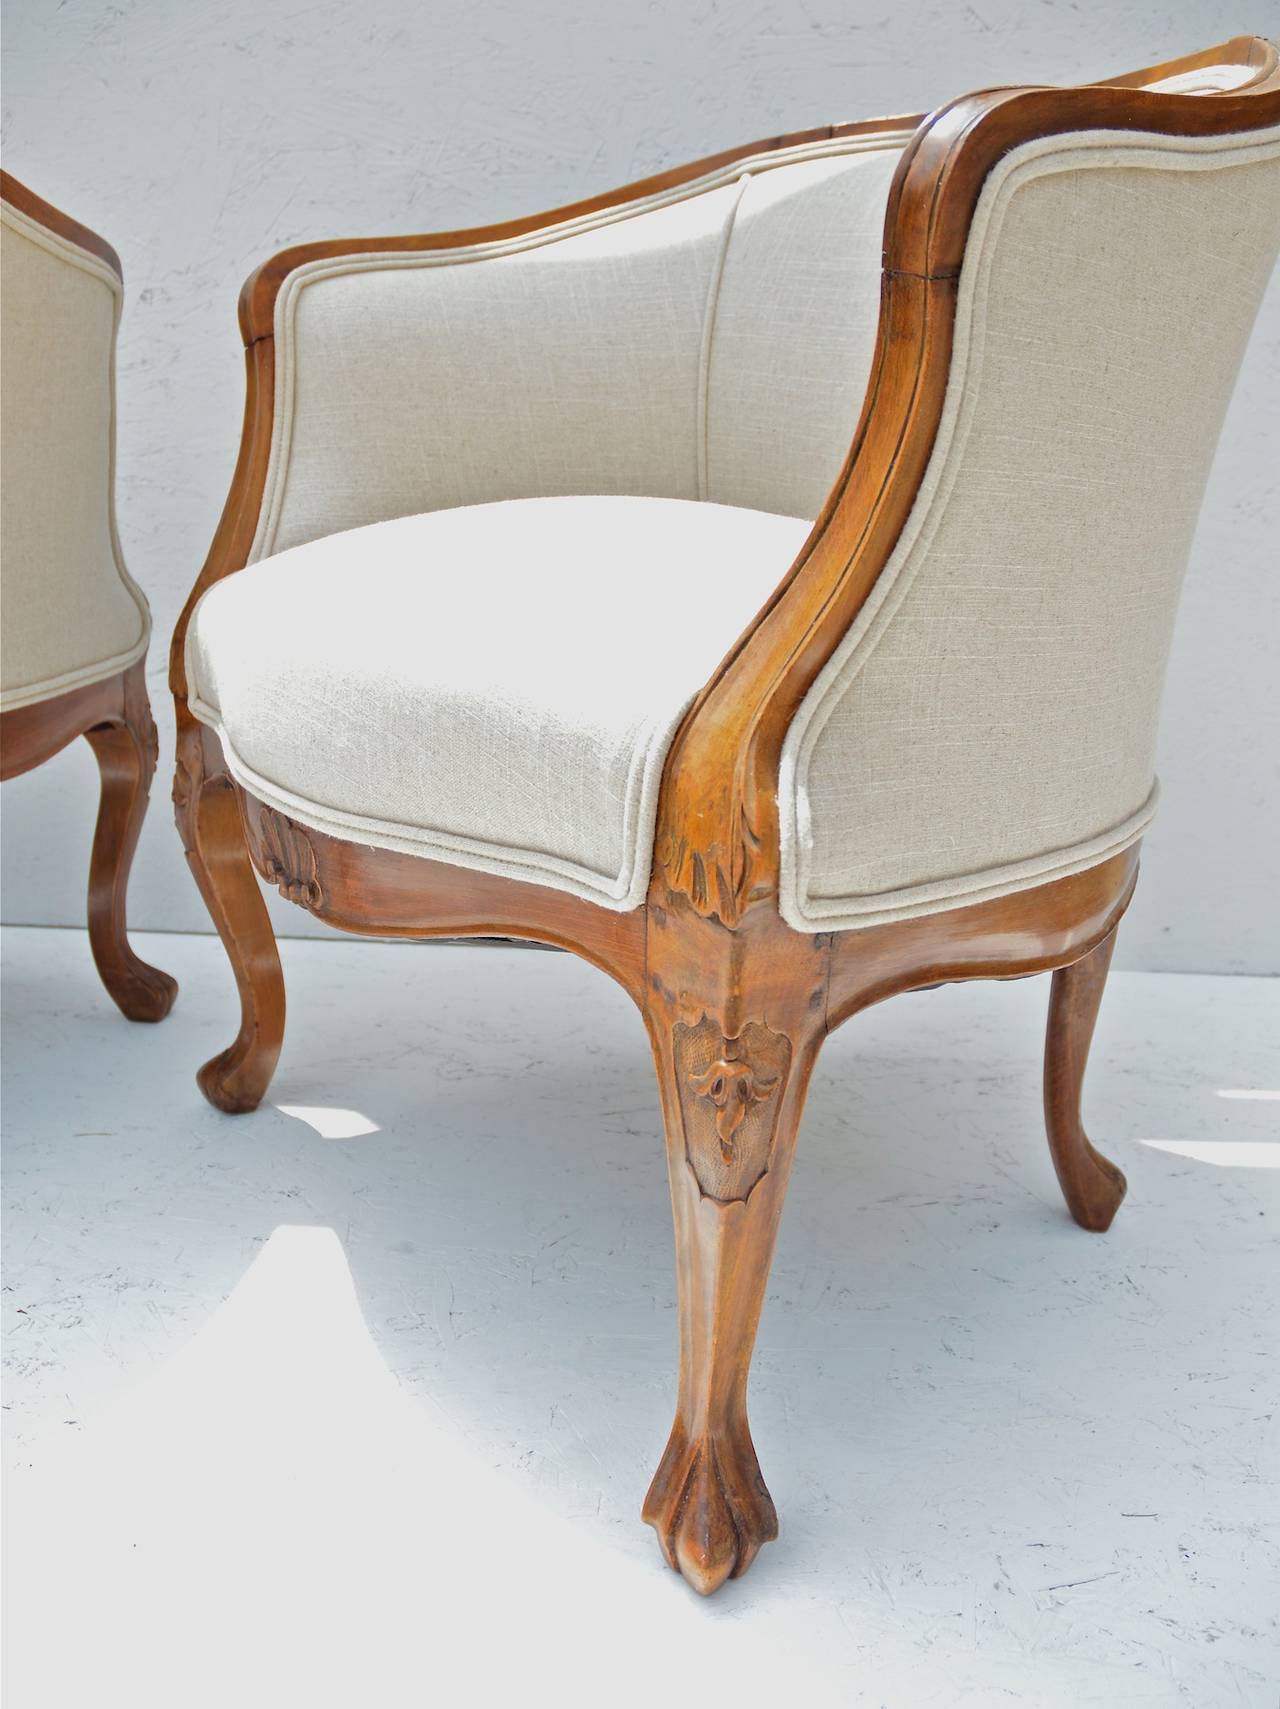 Carved 19th Century Slipper Chairs